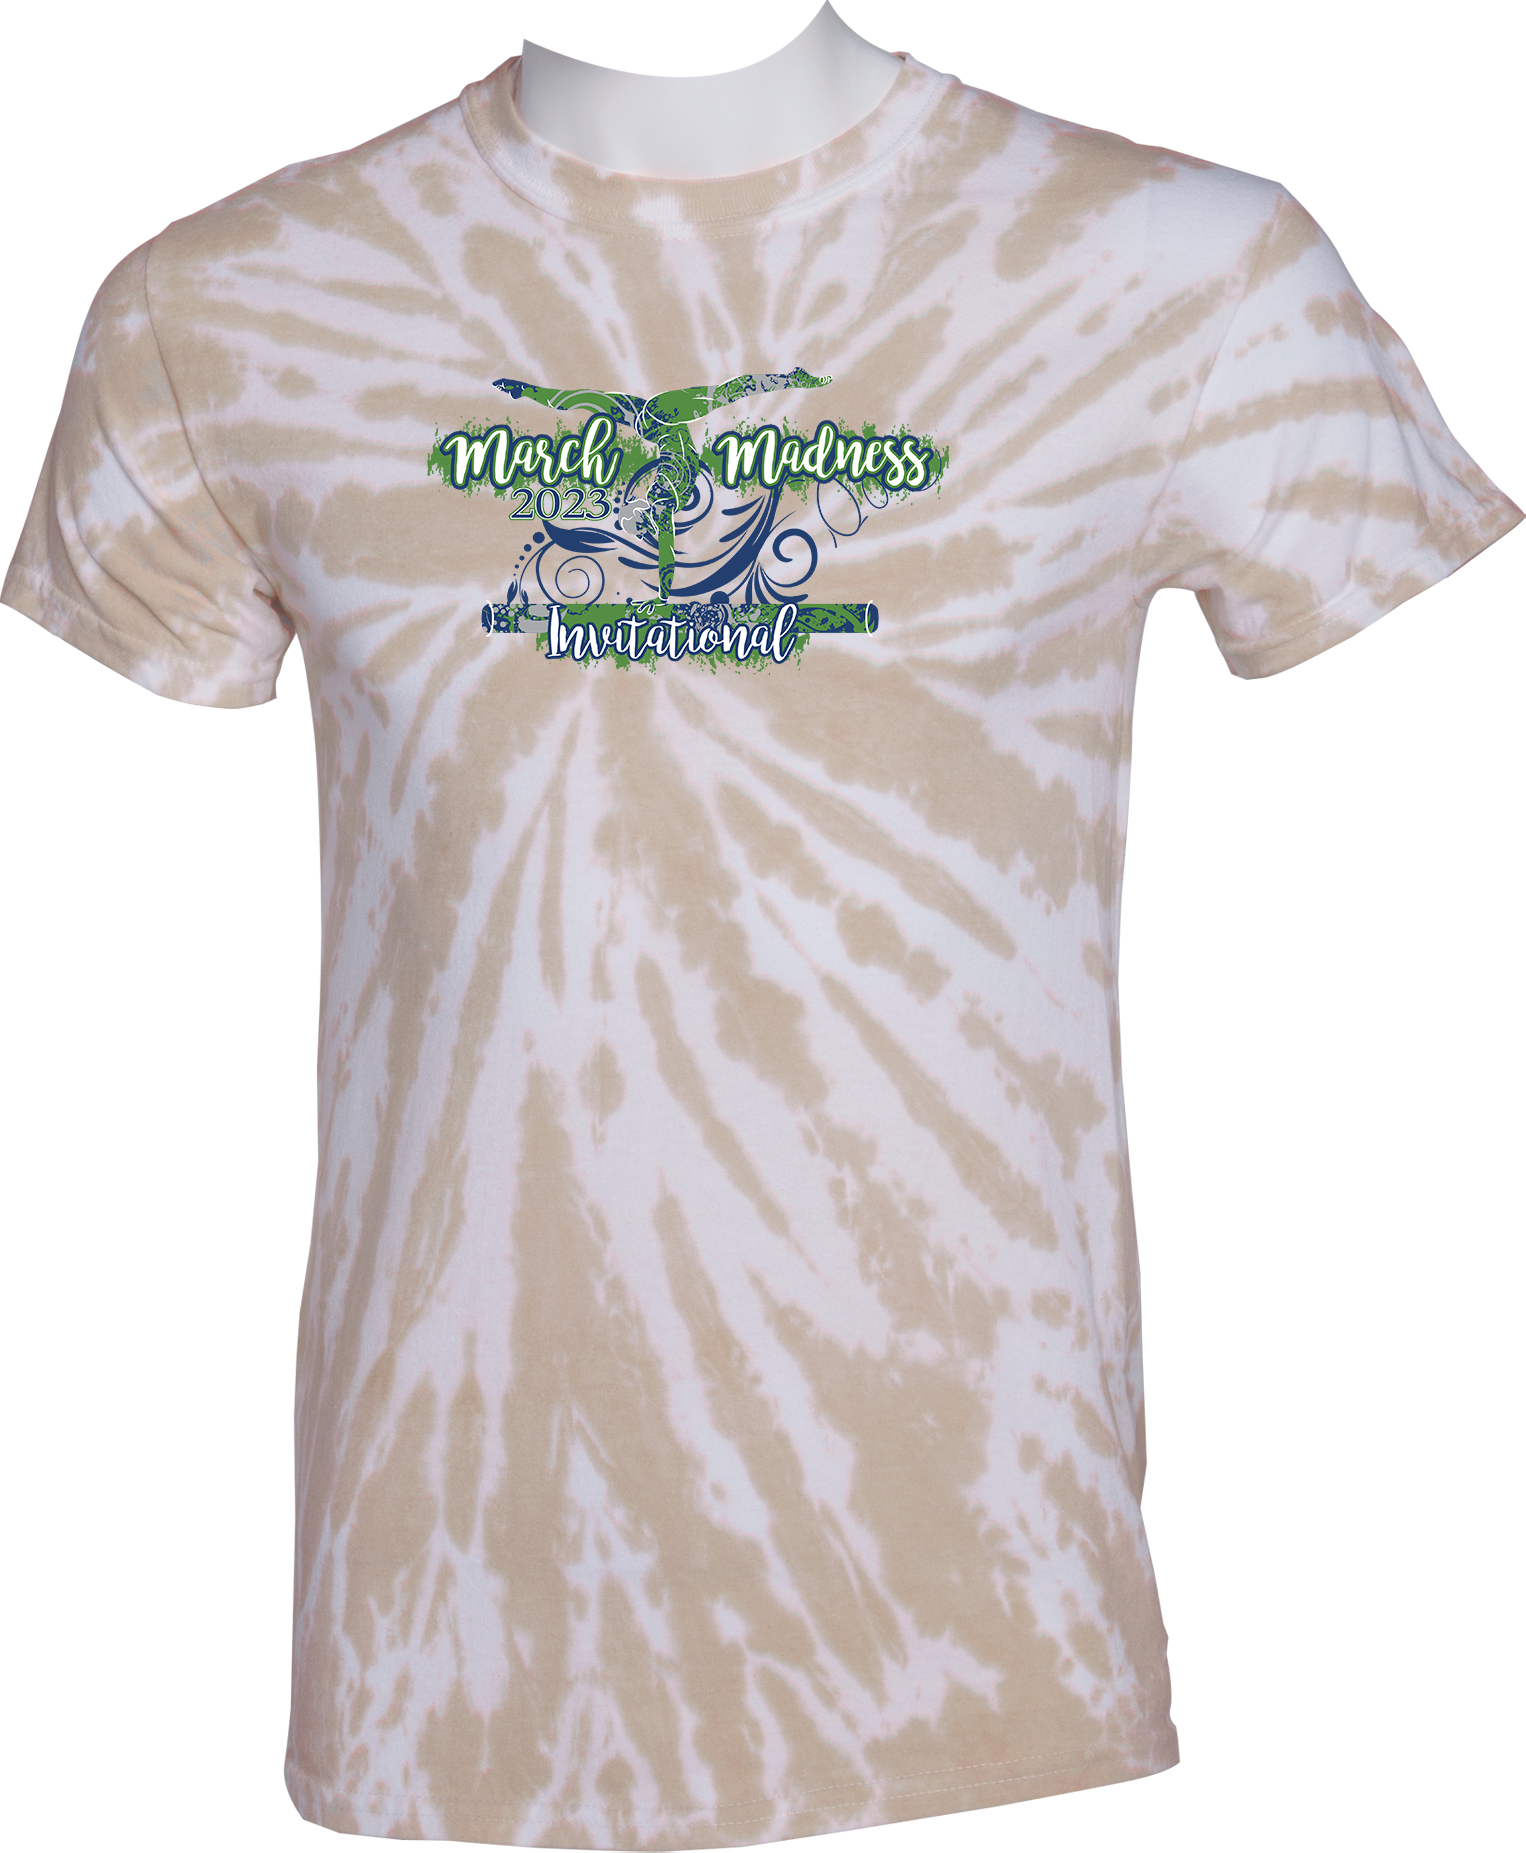 TIE-DYE SHORT SLEEVES - 2023 March Madness Invitational